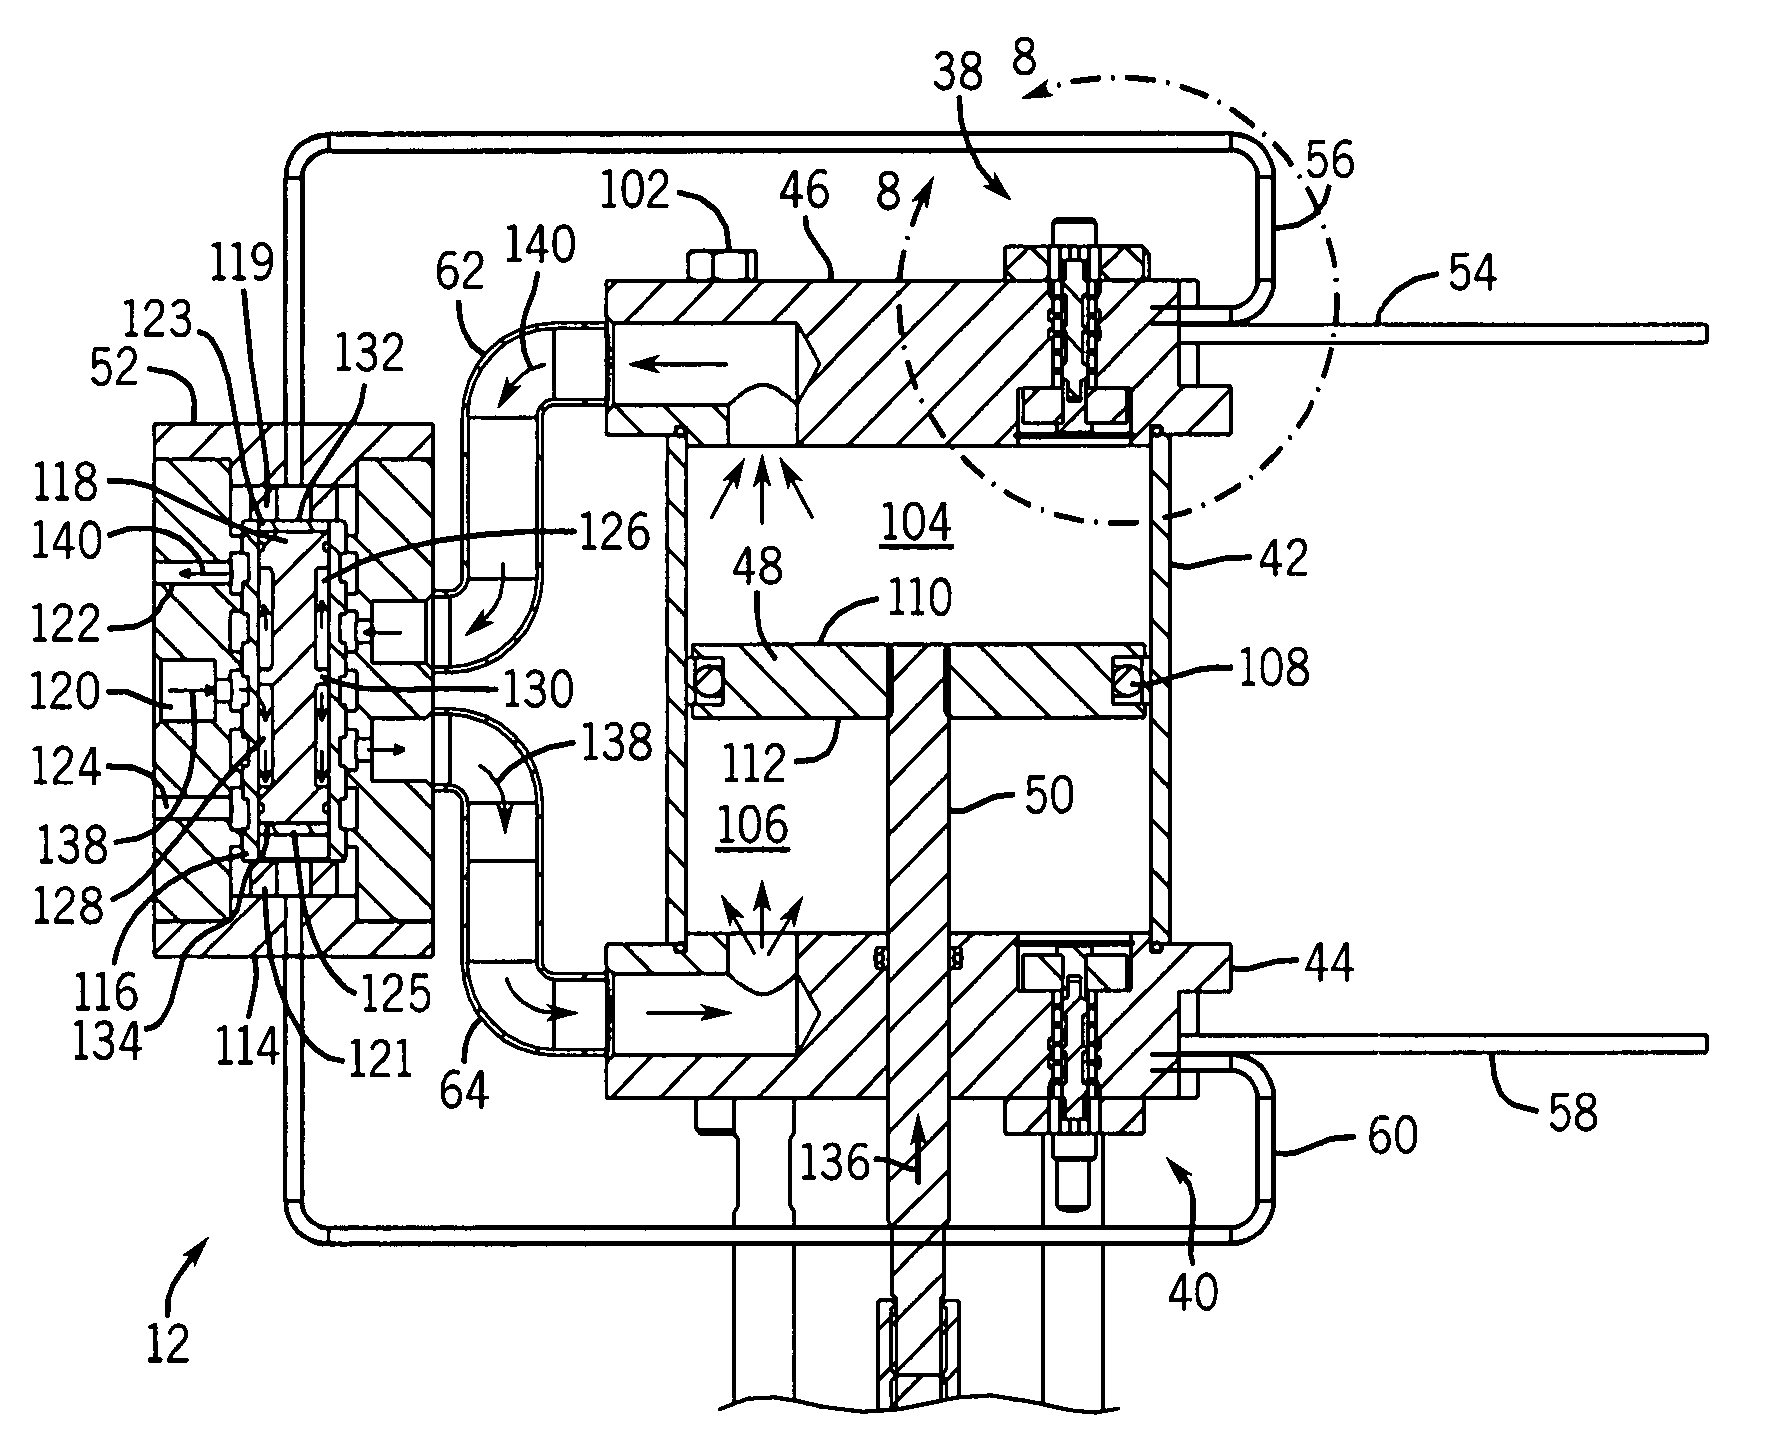 Magnetically sequenced pneumatic motor